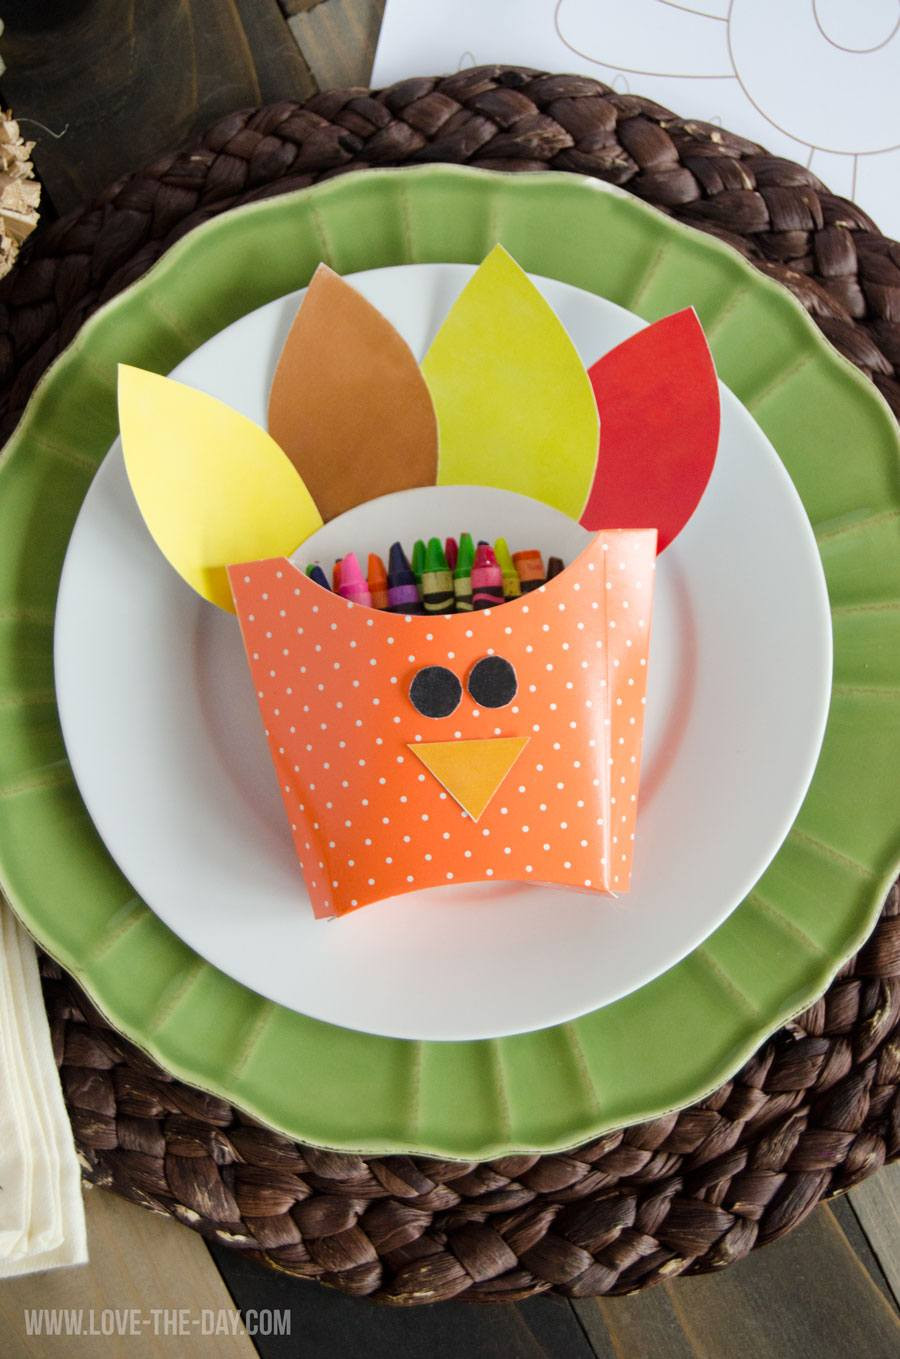 Thanksgiving Turkey Craft
 15 DIY Turkey Craft Projects for Thanksgiving on Love the Day